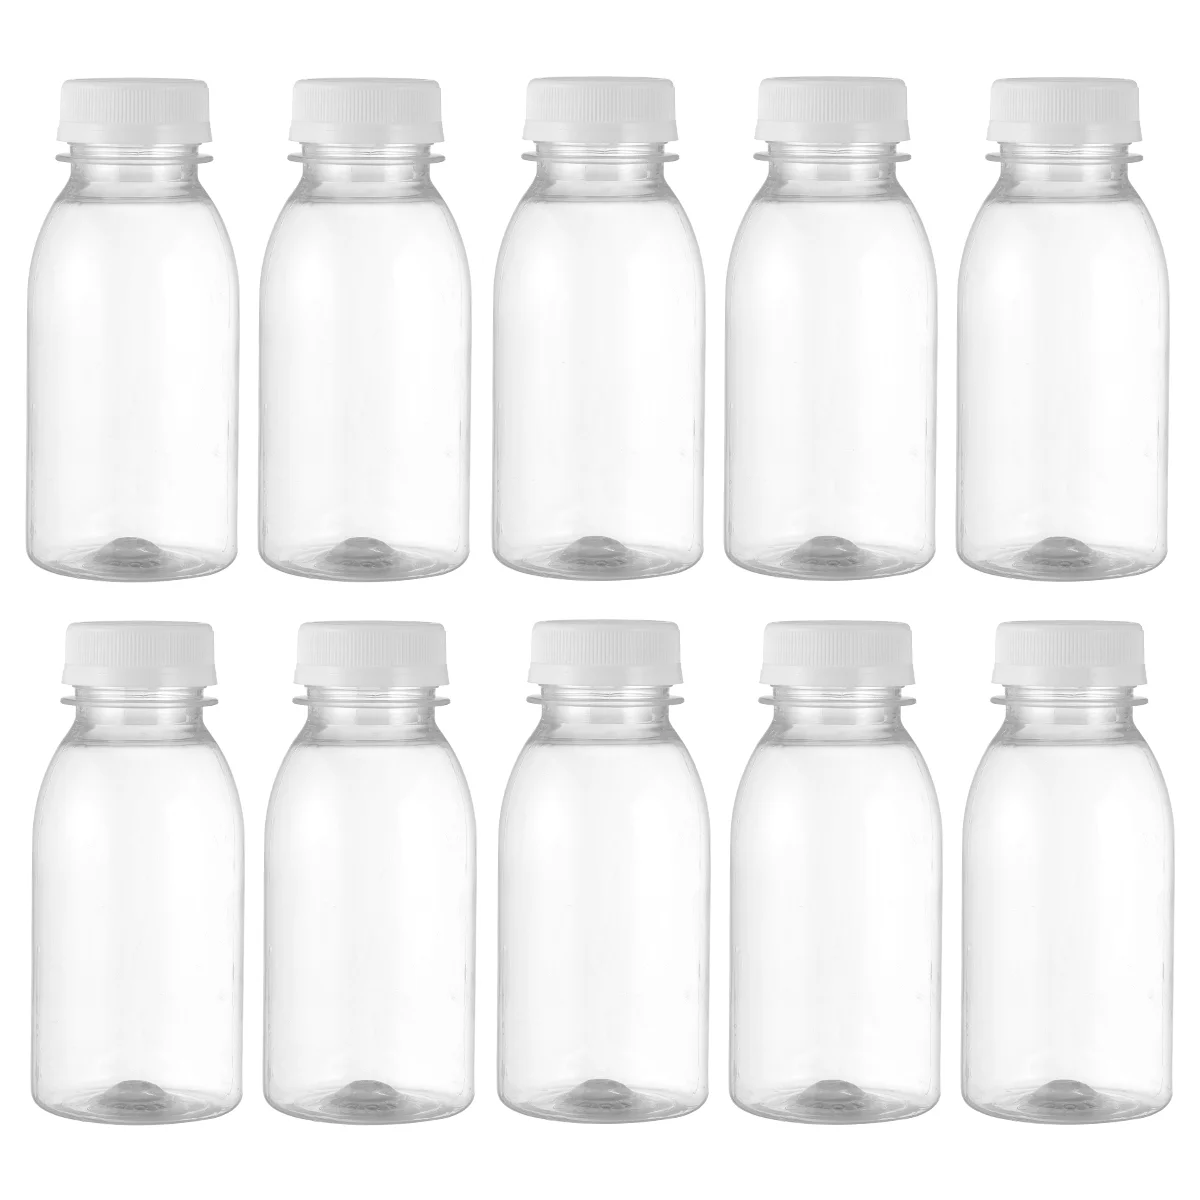 

Bottleswater Bottlereusable Glasscaps Drinkmini Jug Lidsdrinking Box Container Containers Empty Beveragestorage Lunch Square